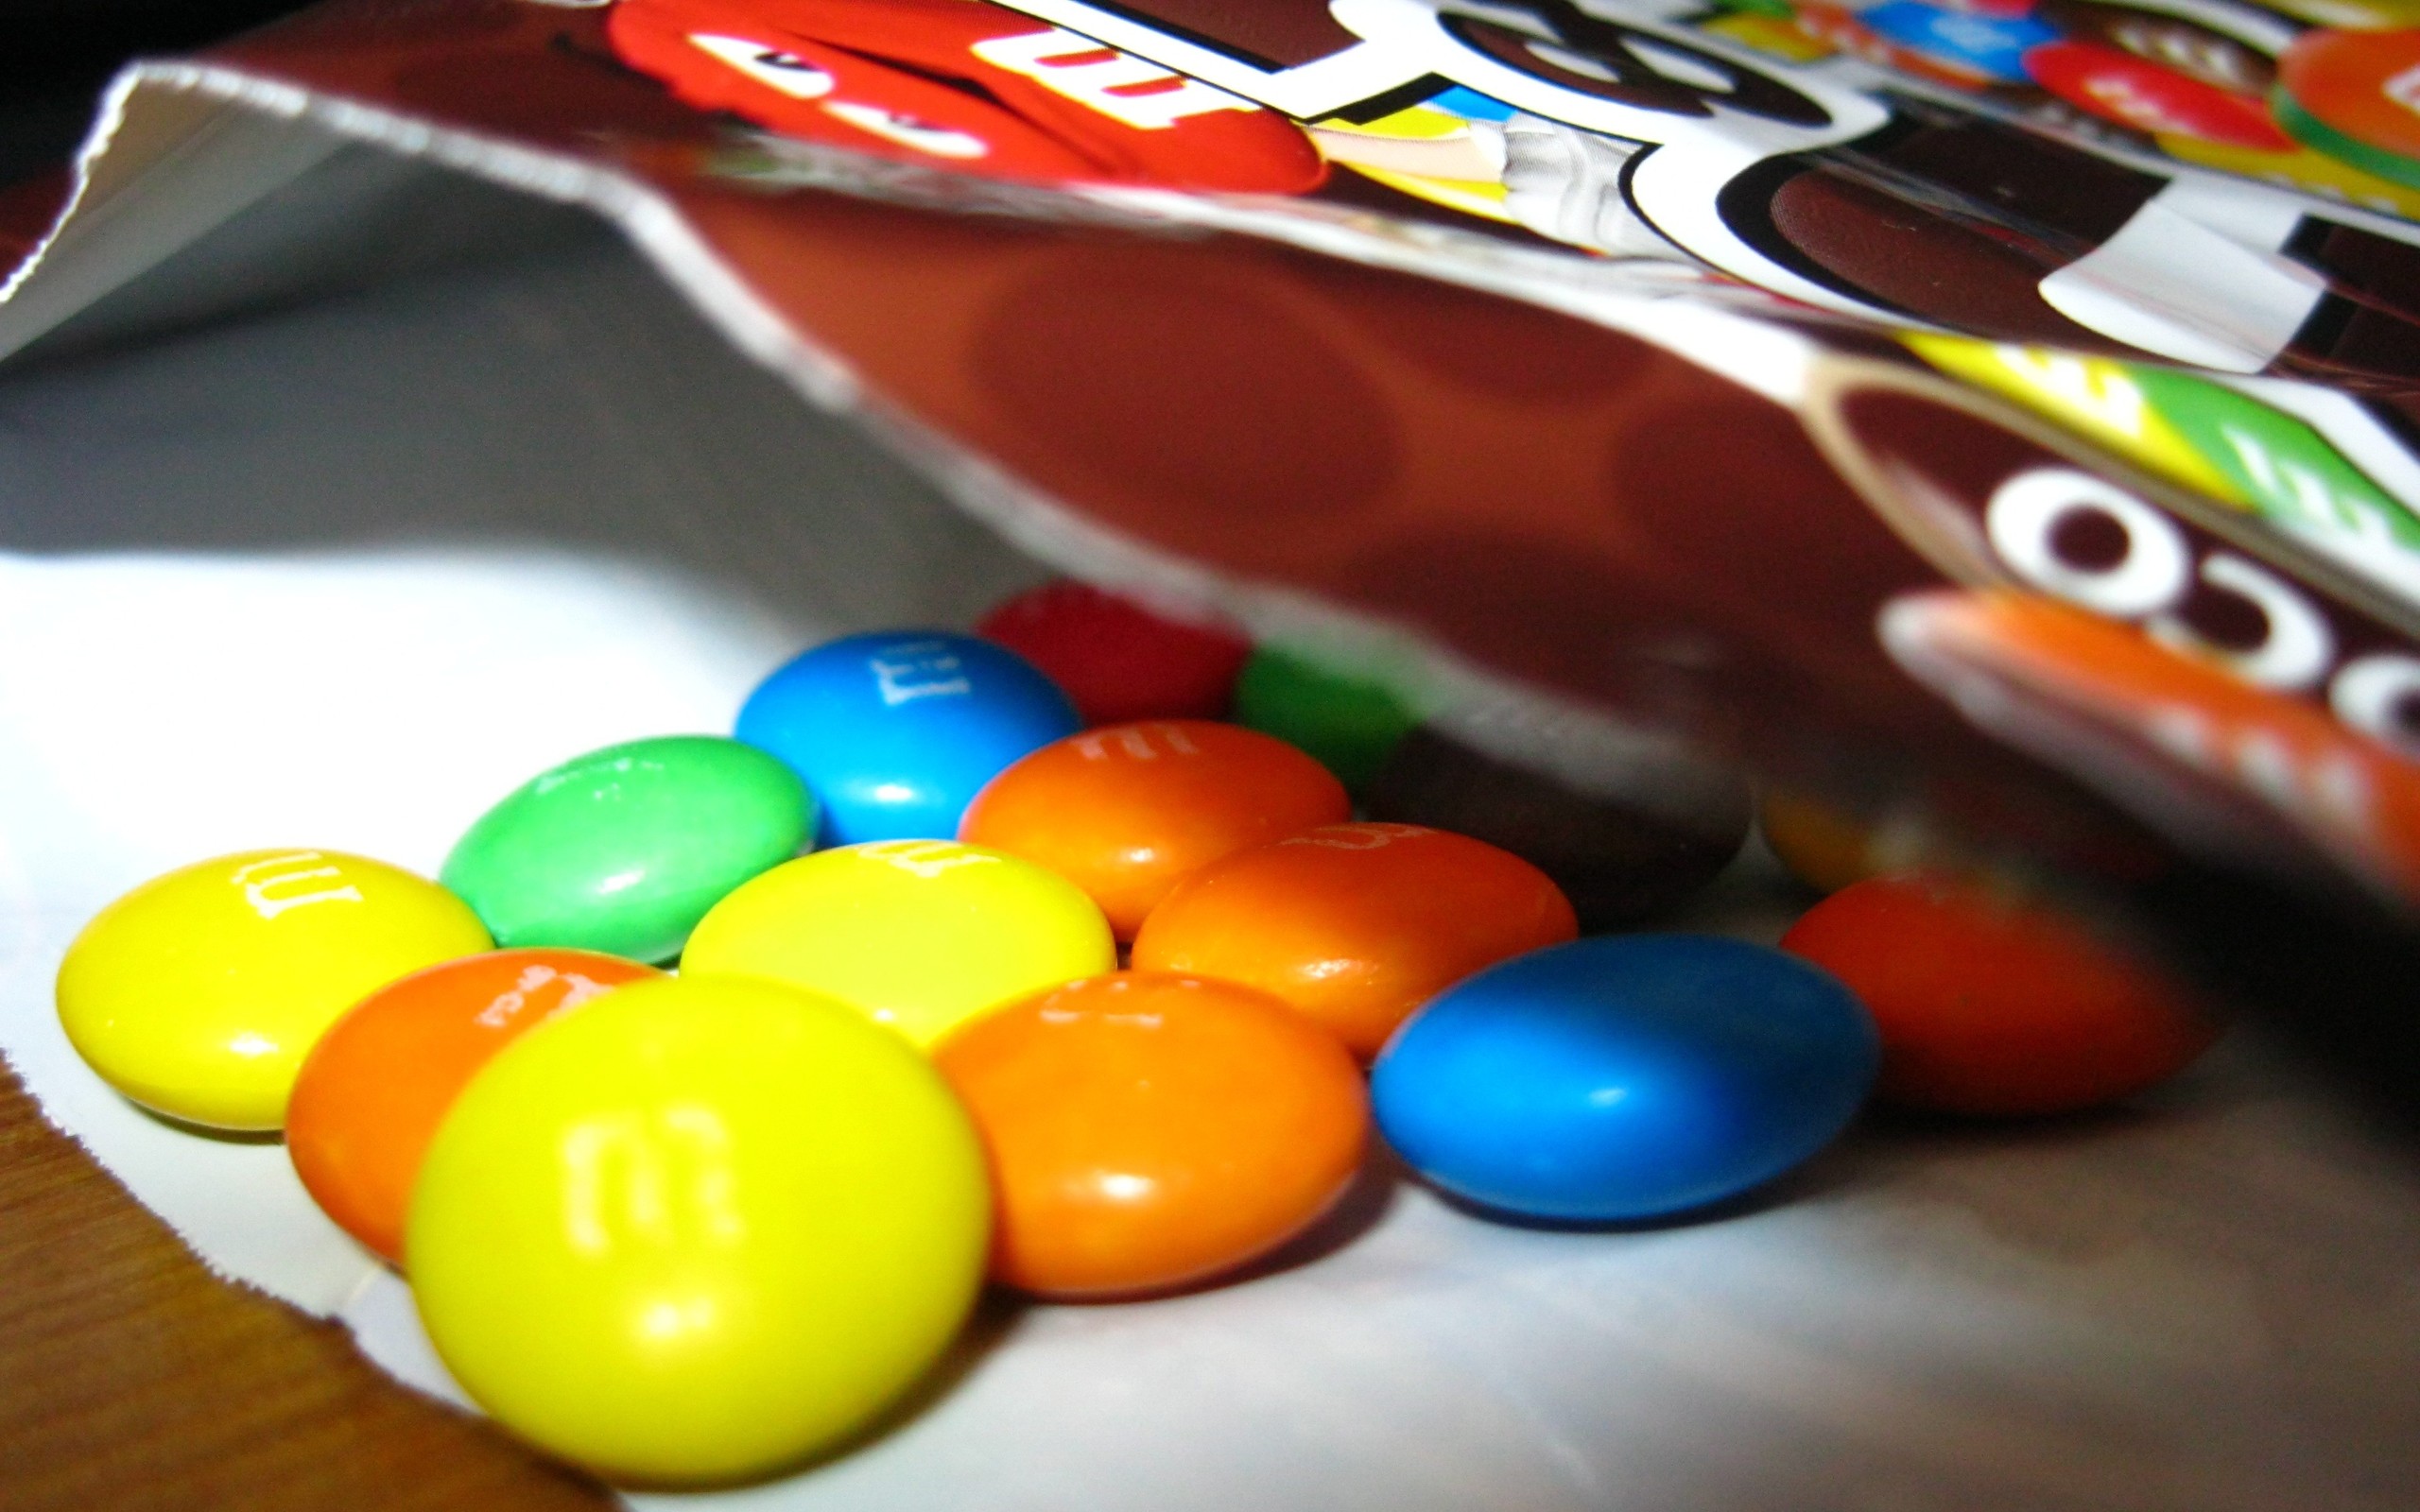 General 2560x1600 candy m&m's sweets food closeup